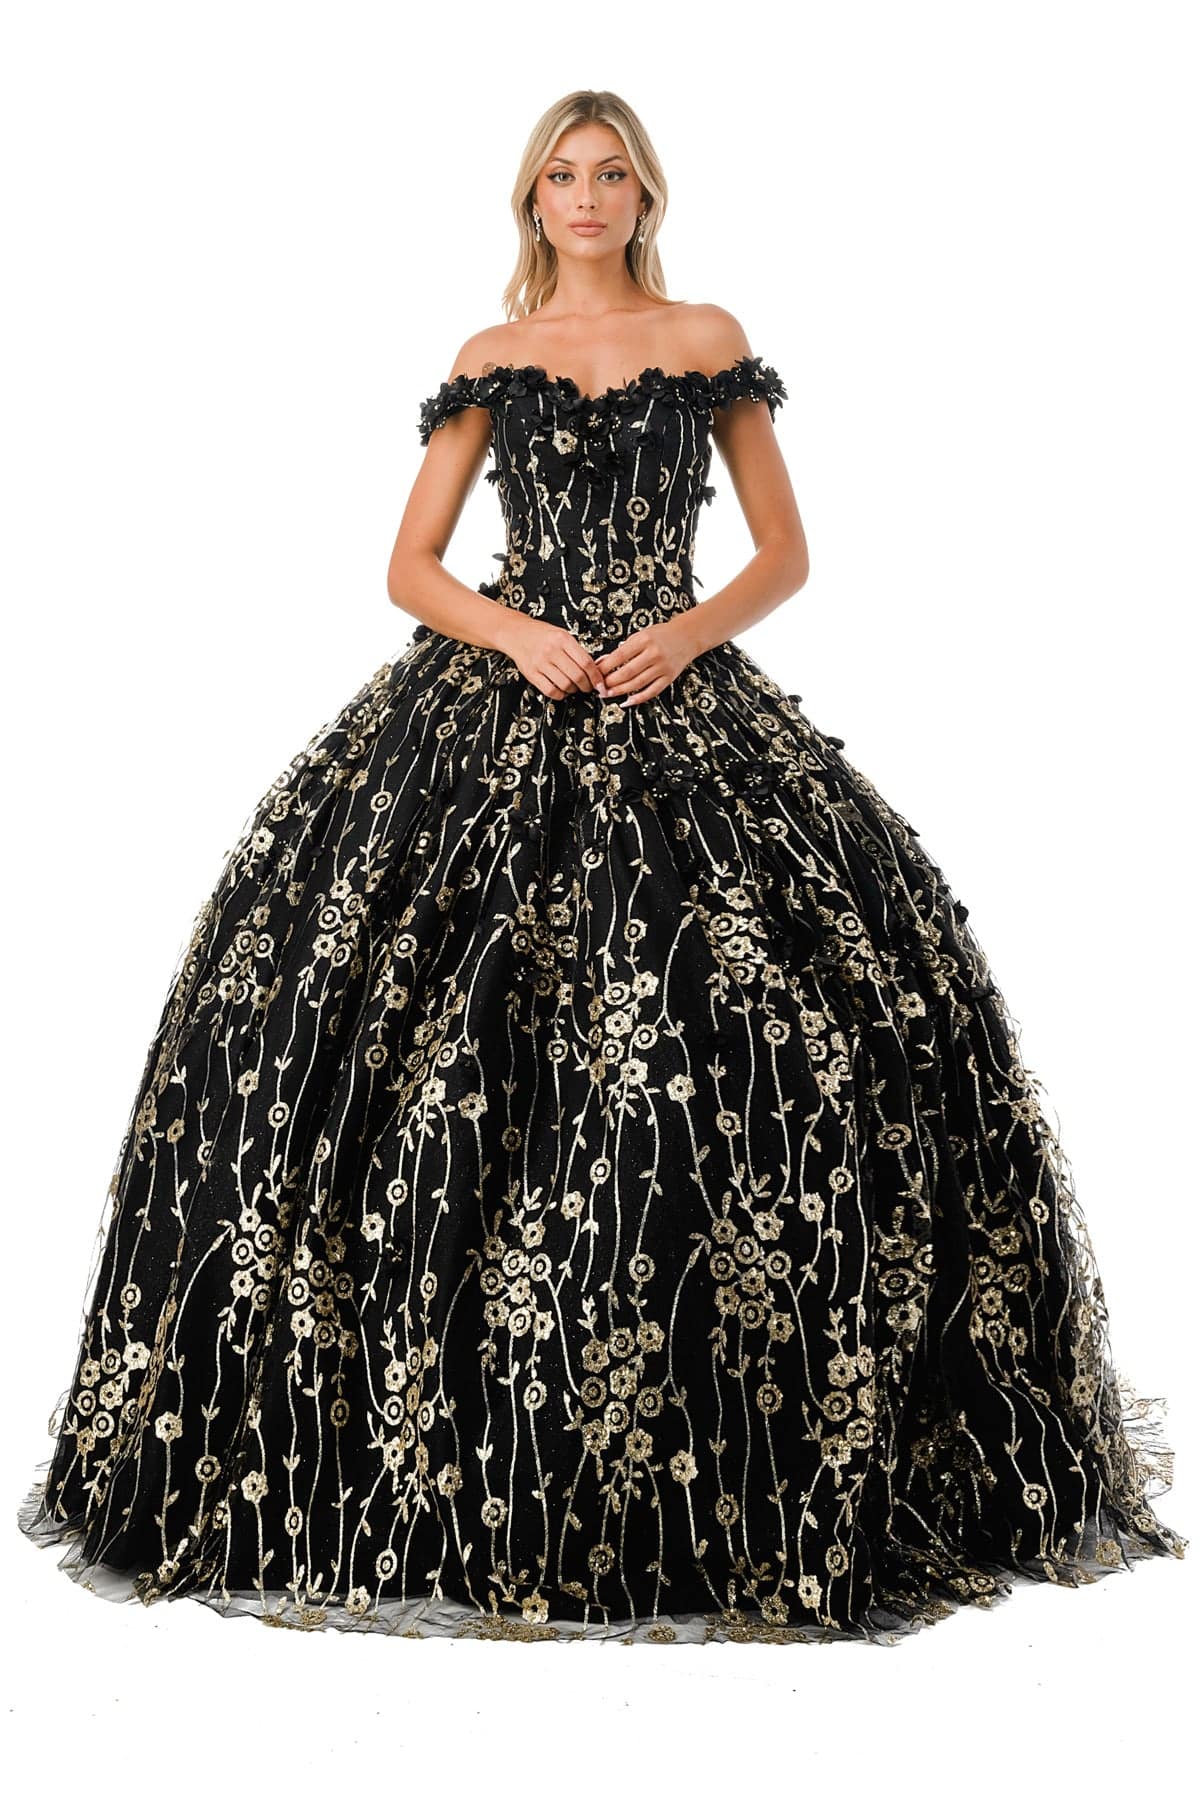 Aspeed L2766A Gorgeous Black & Gold Floral Inspired Ball Gown - NORMA REED